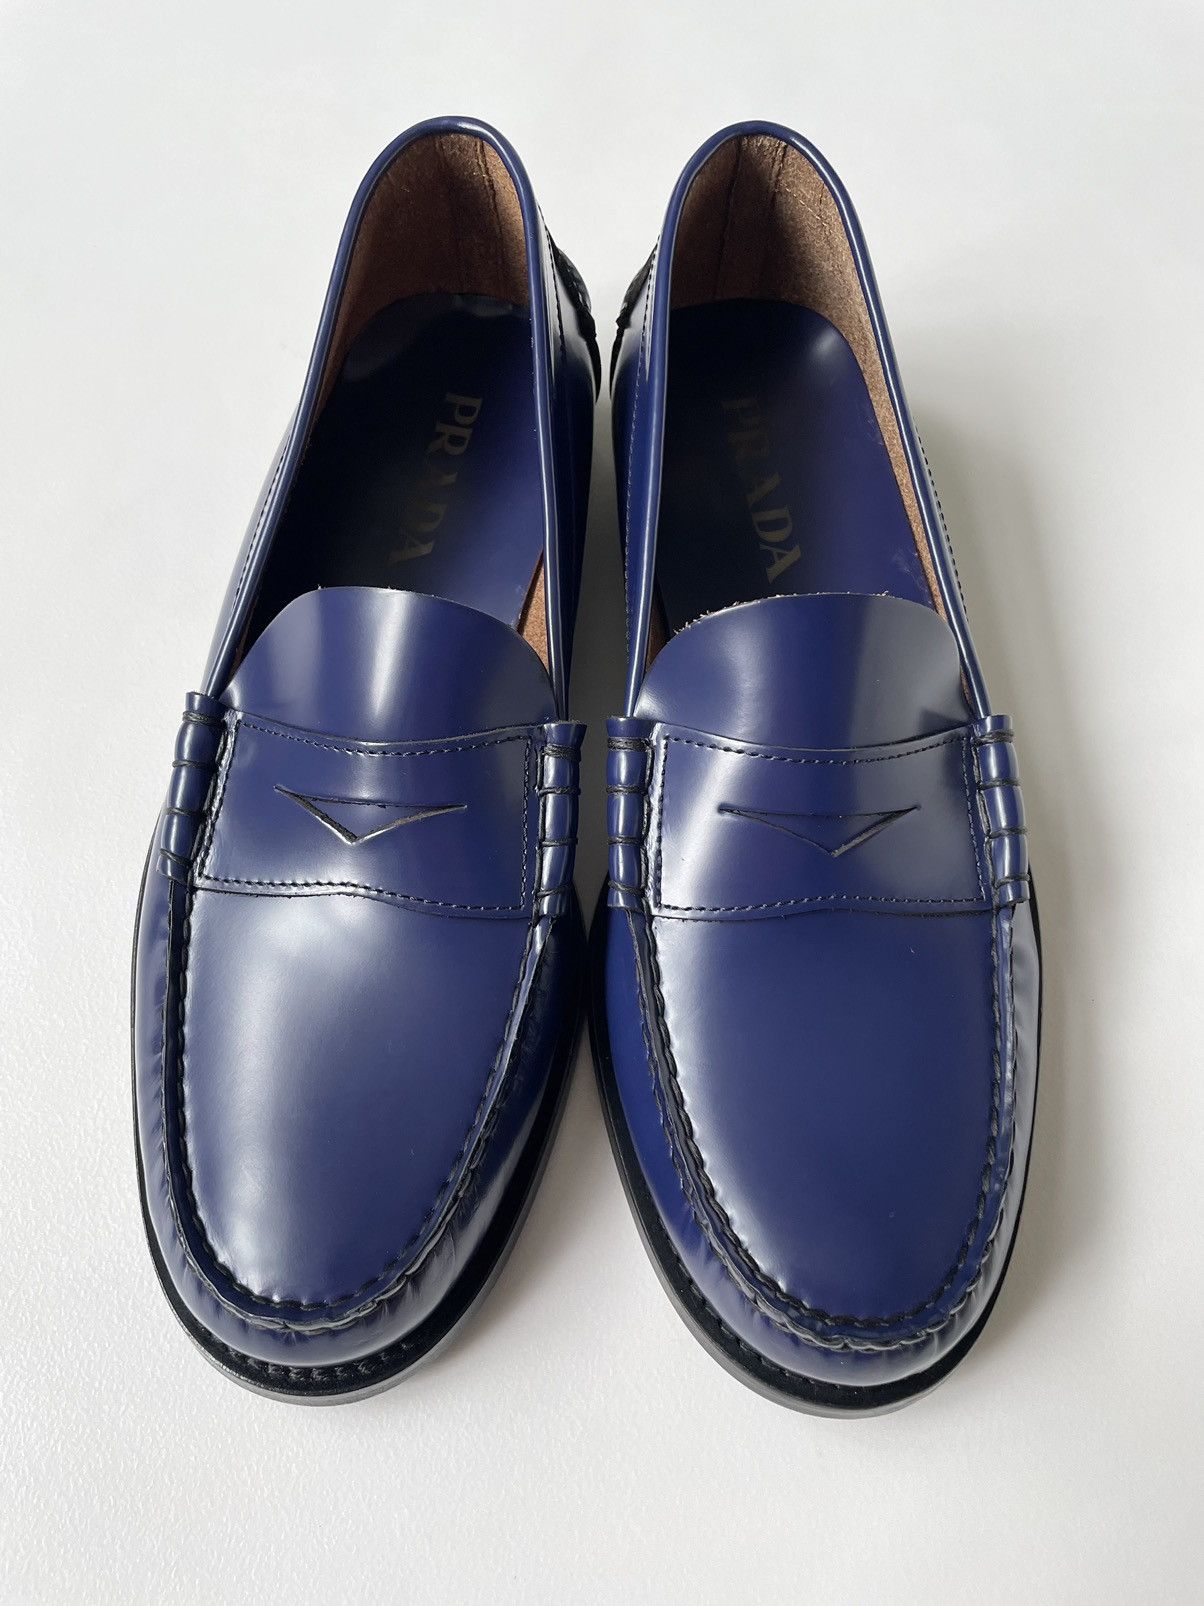 Pre-owned Prada Polished Cobalt Blue Leather Loafers